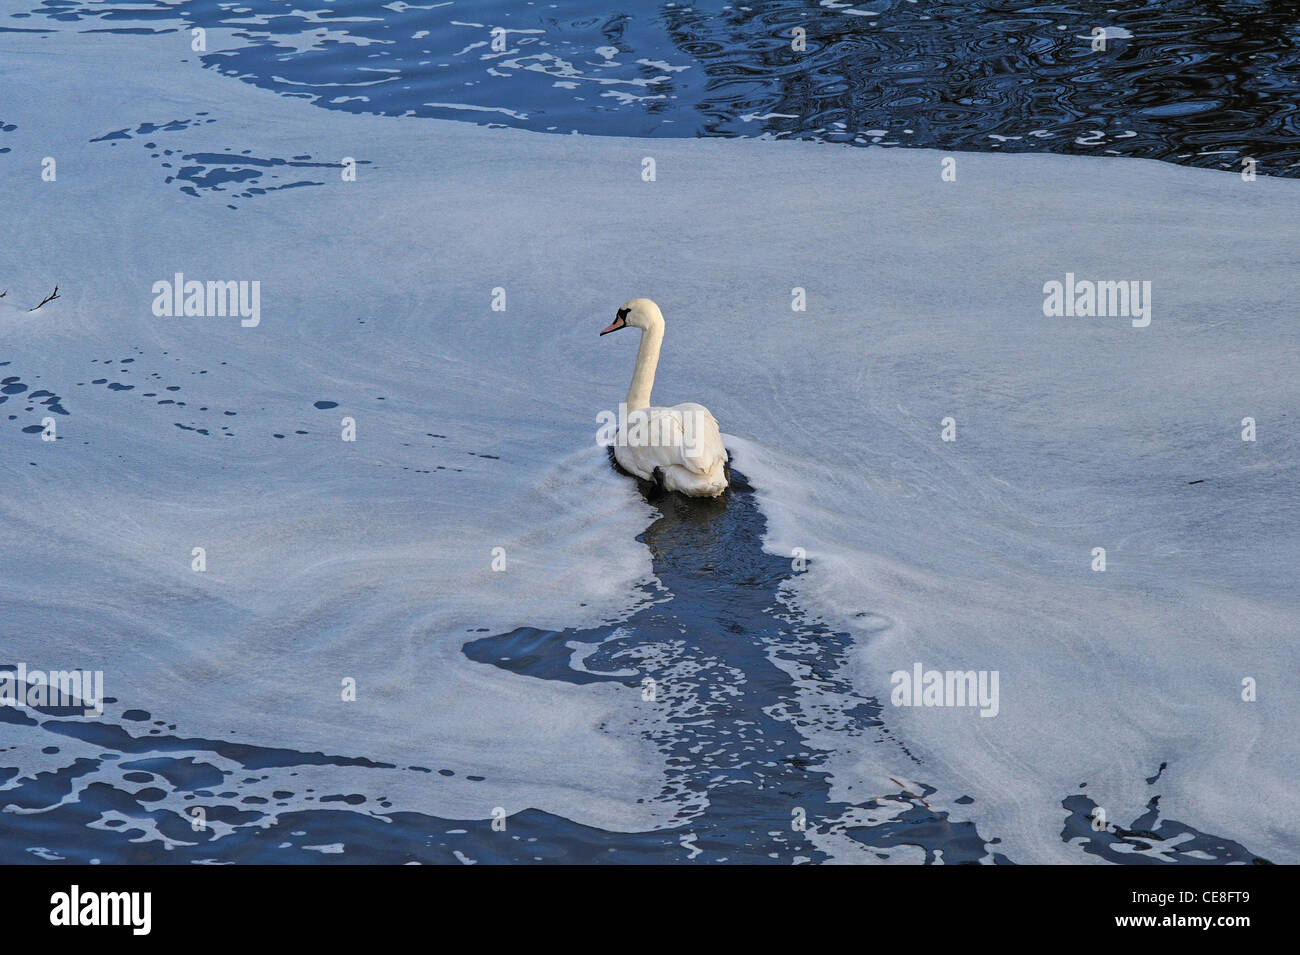 Adult Mute swan swimming through a polluted river Stock Photo